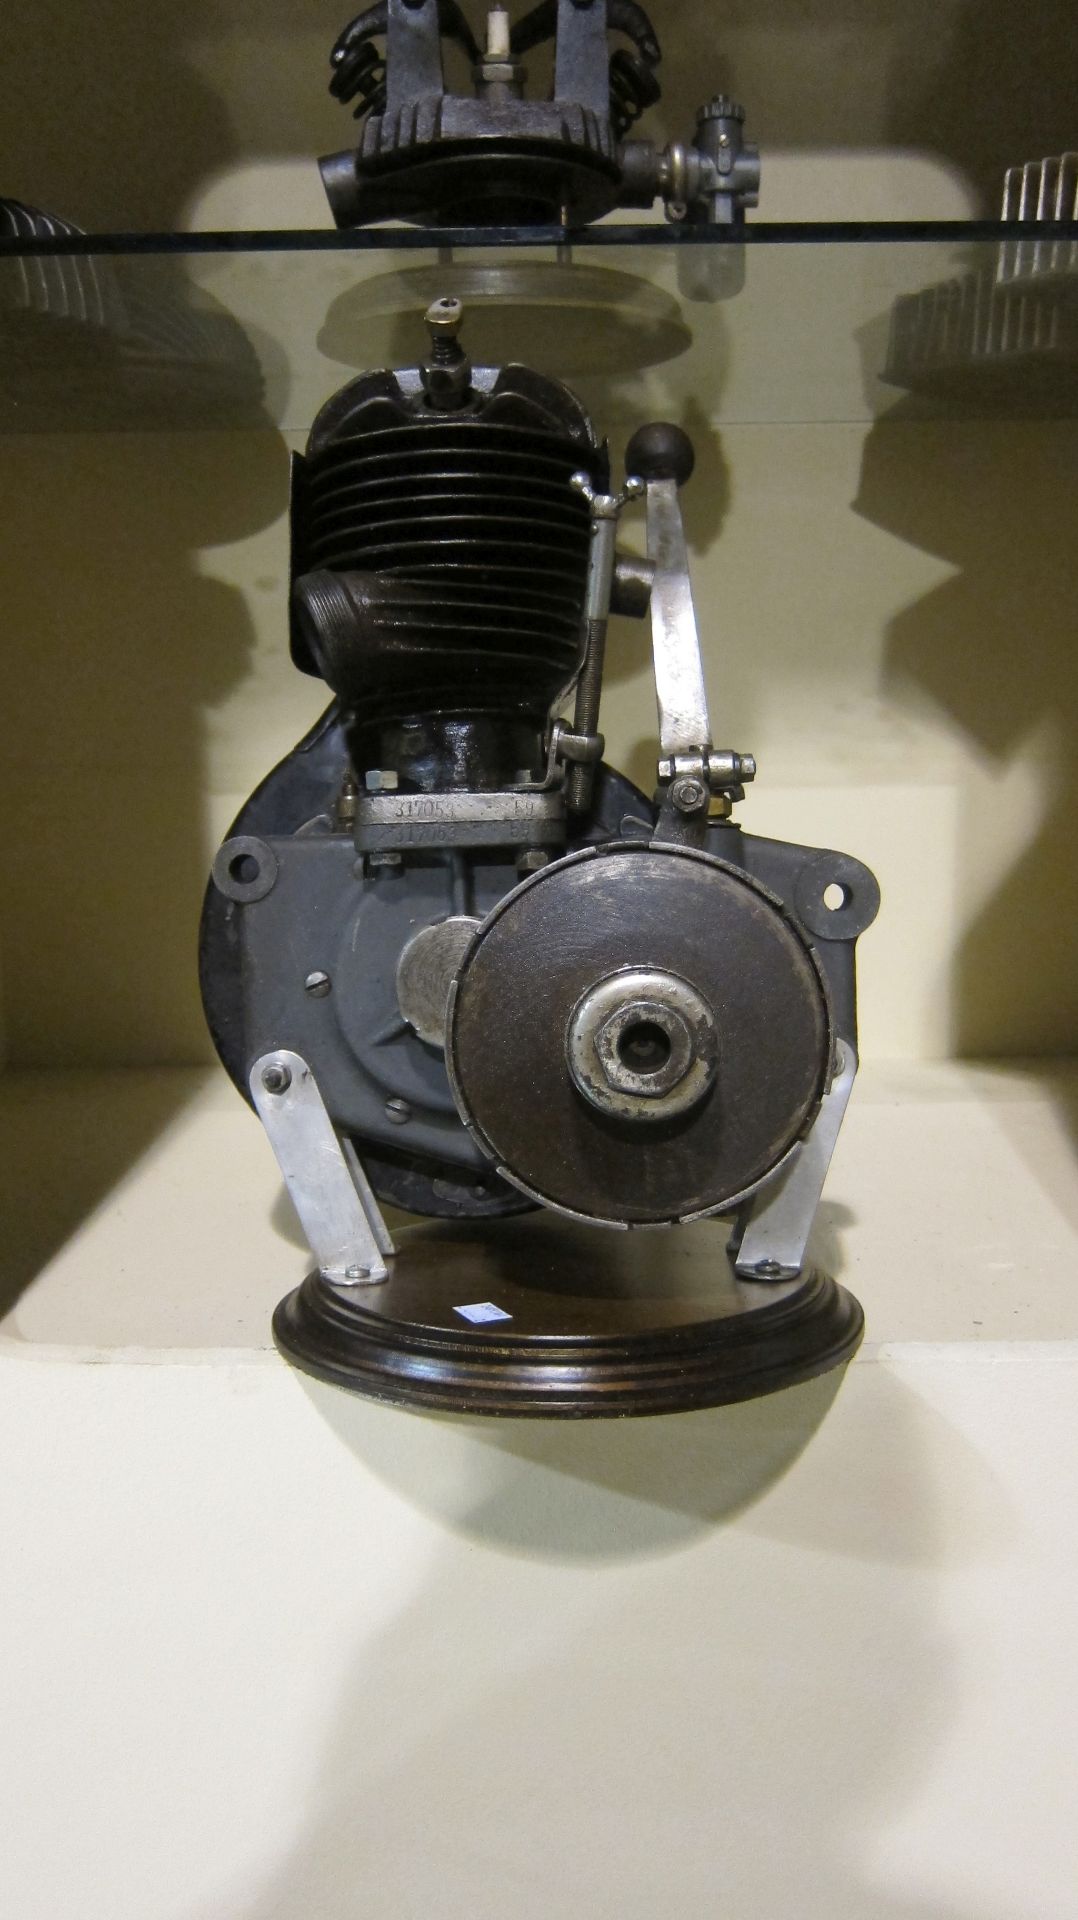 A believed DKW Two-stroke engine with transmission